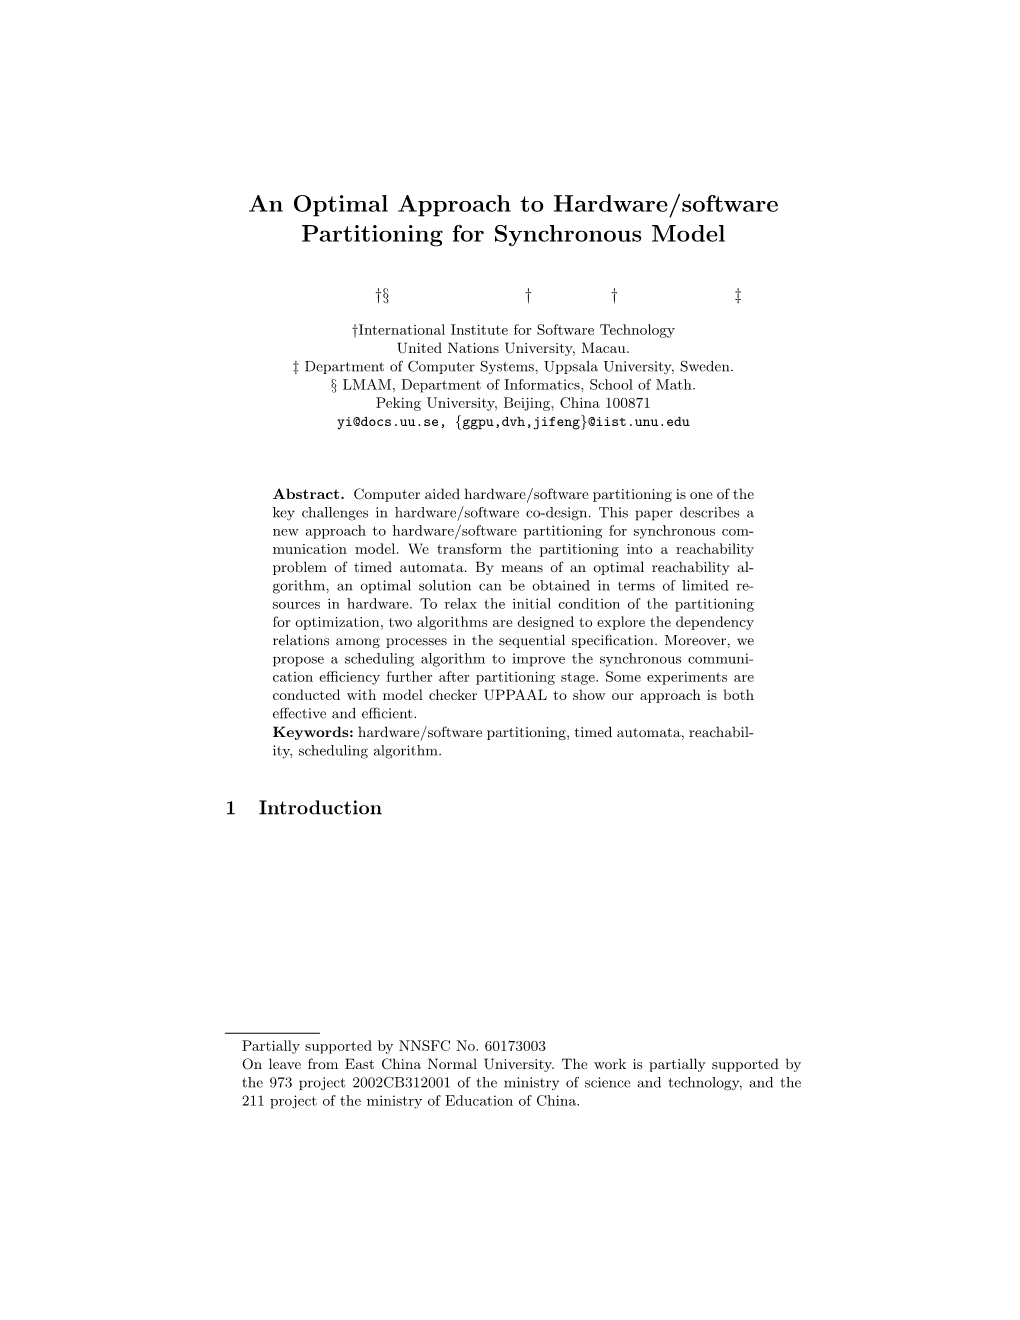 An Optimal Approach to Hardware/Software Partitioning for Synchronous Model